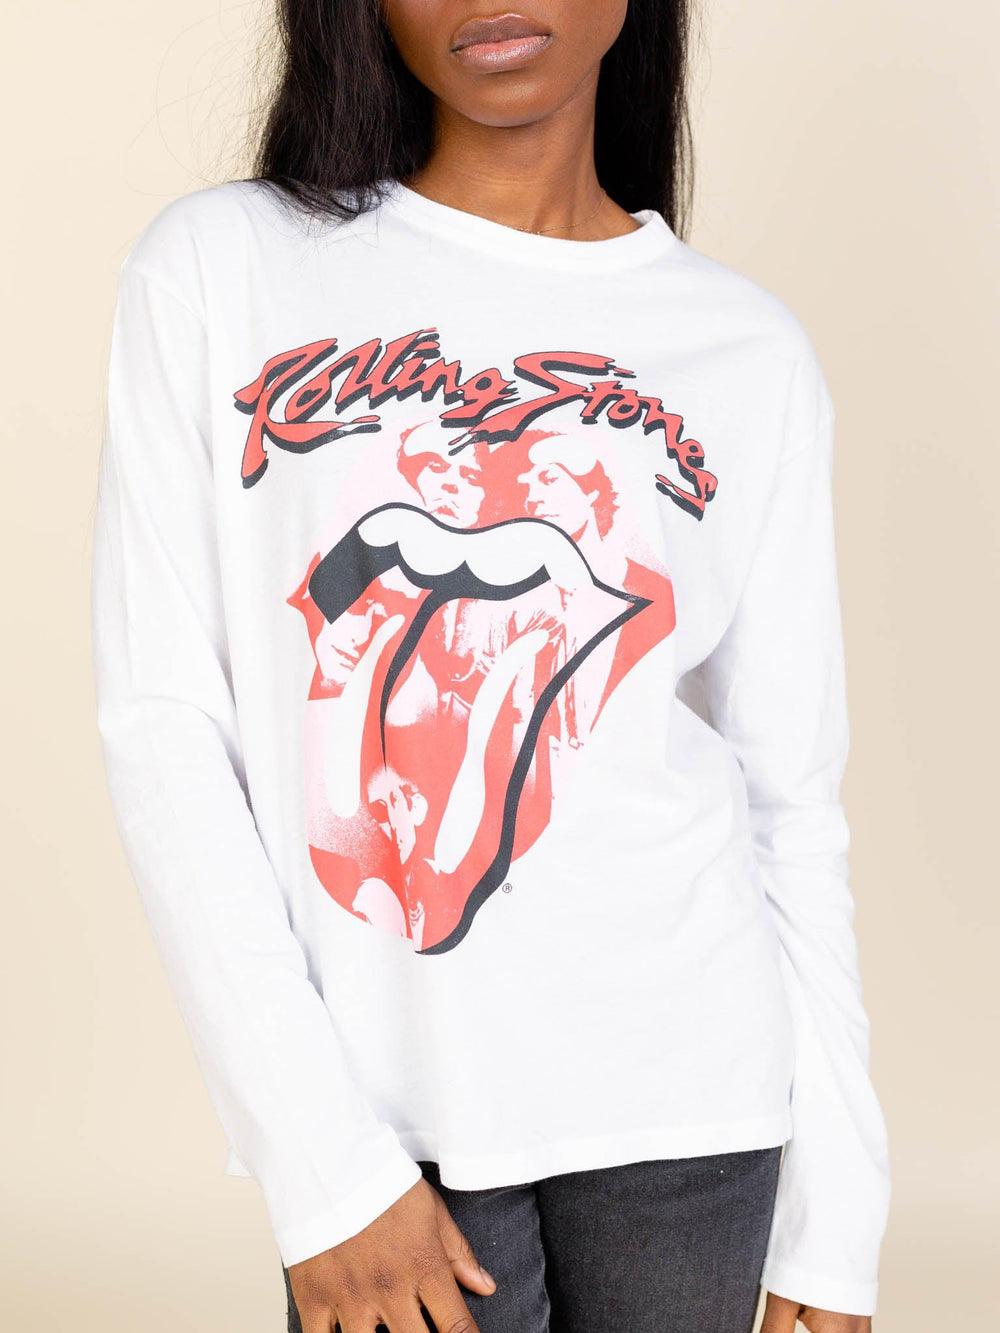 Daydreamer-Daydreamer Rolling Stones Band Lick Crew Long Sleeve - Leela and Lavender